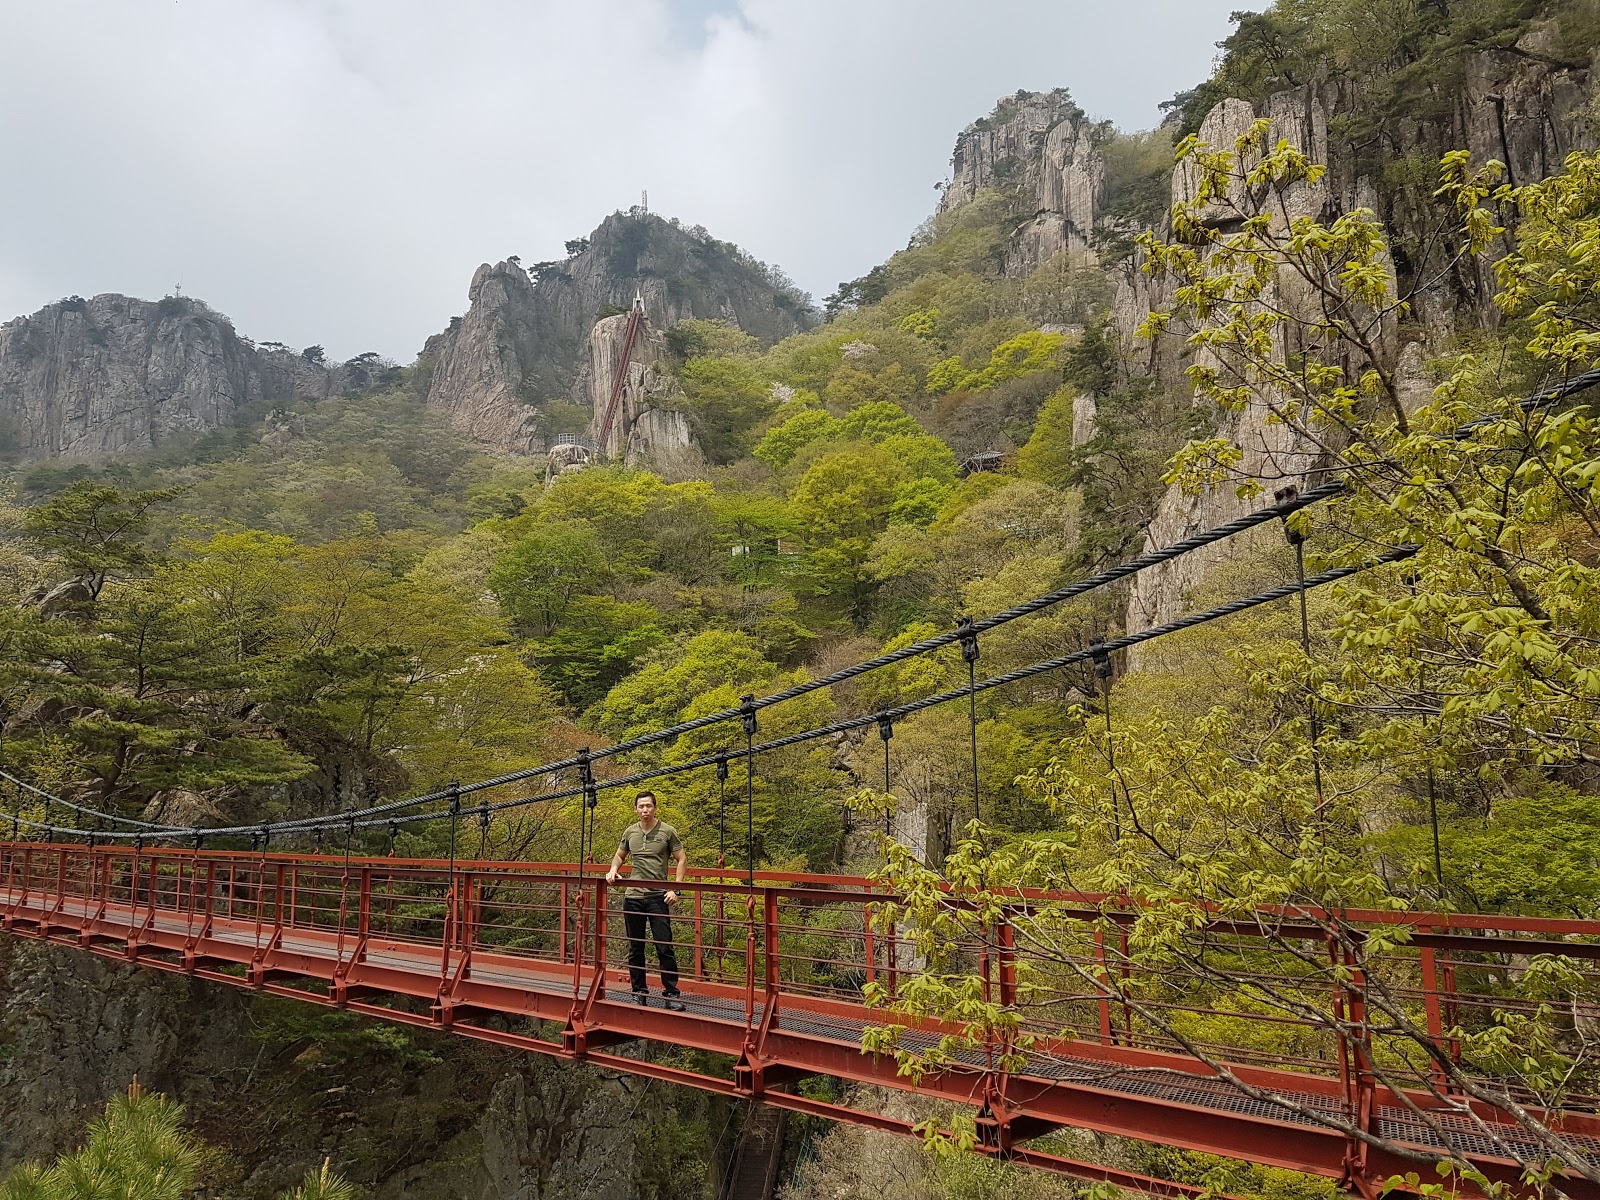 Travellers and Paddlers: Day trip to Daedunsan